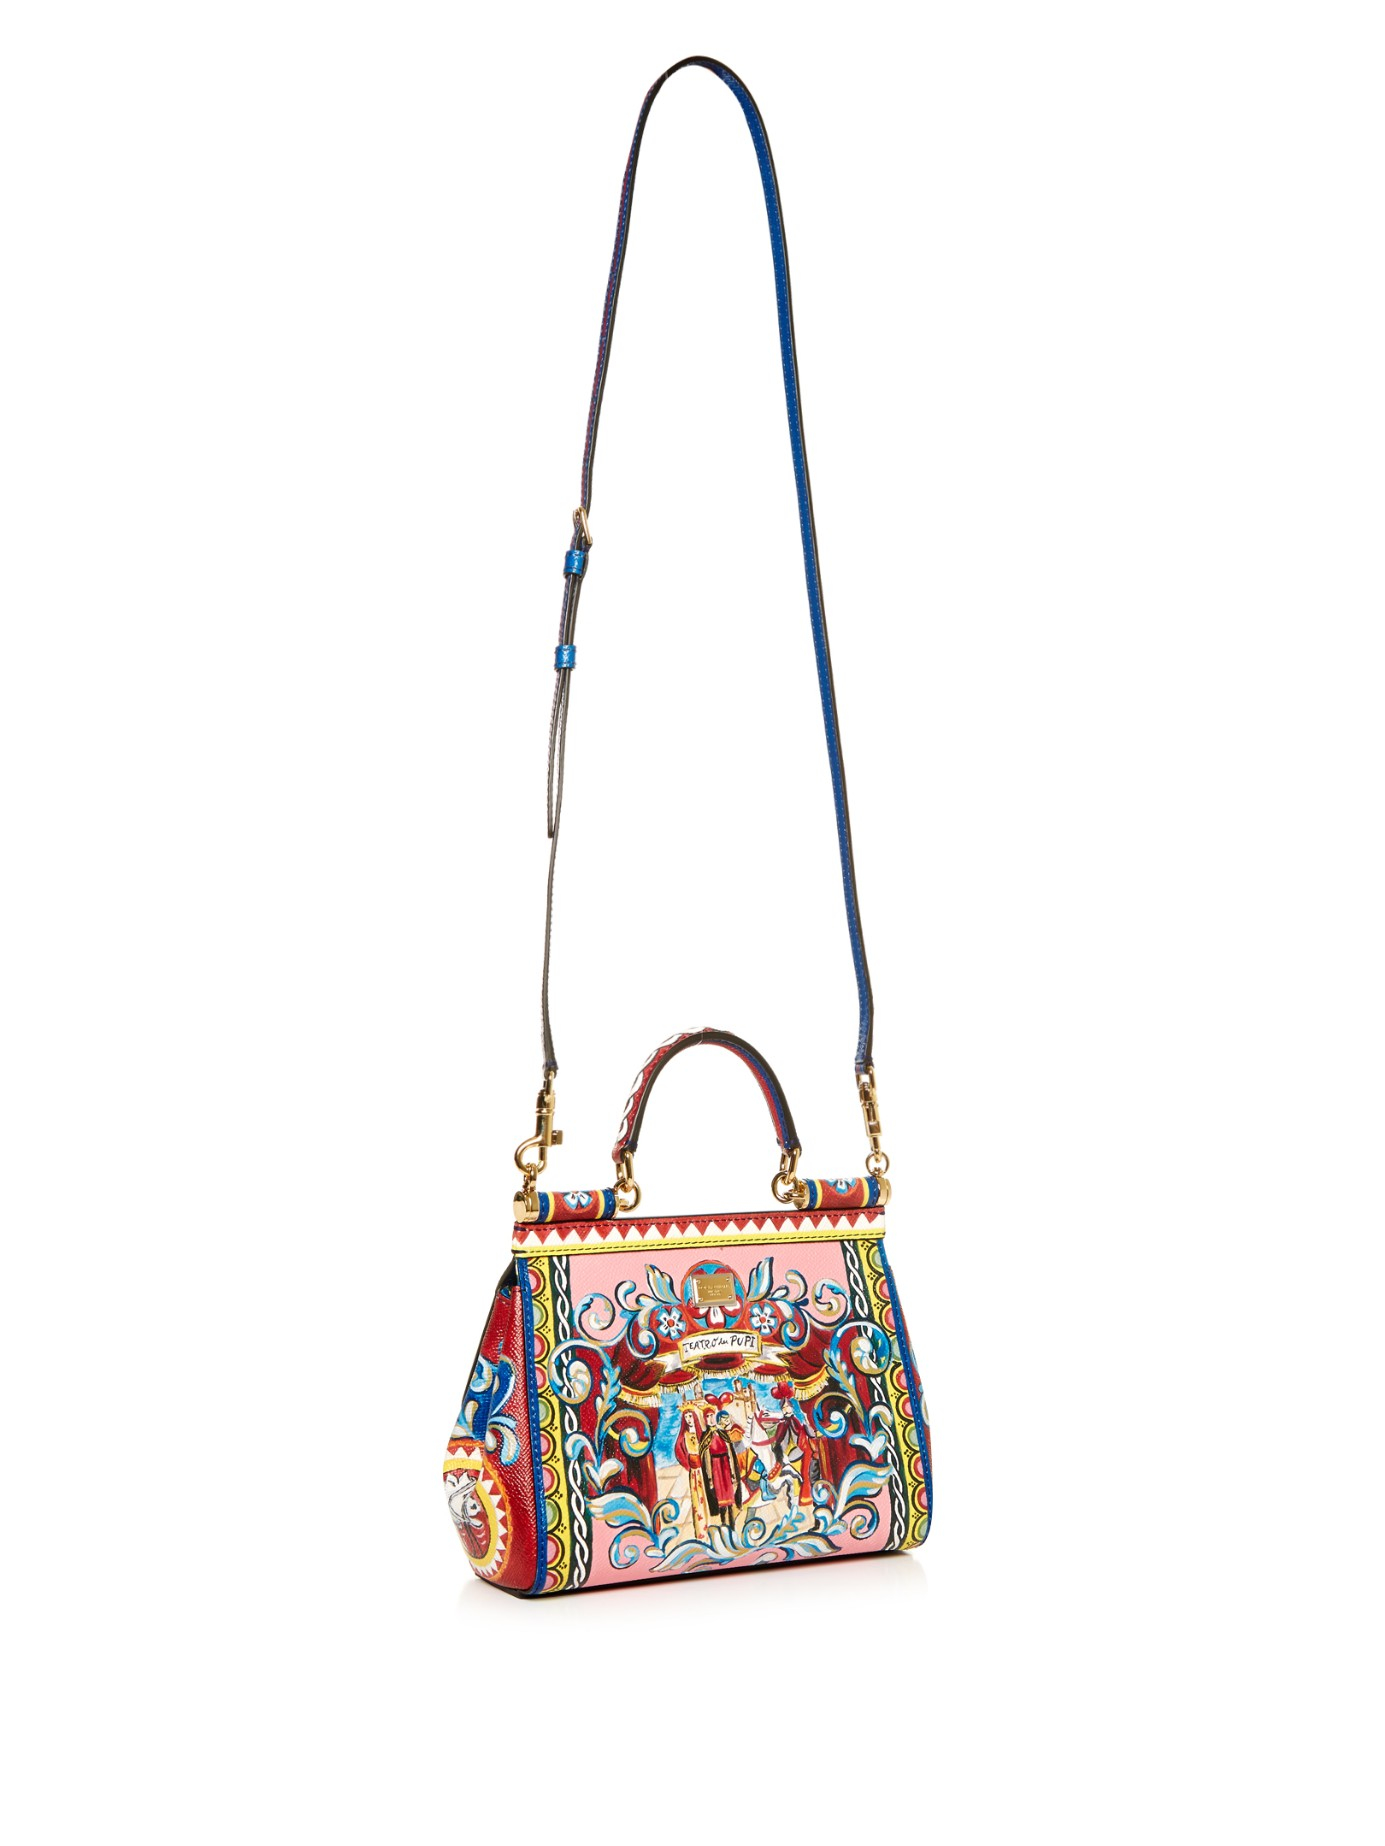 Dolce & Gabbana, Bags, Dolce Gabbana Small Sicily Leather Top Handle Bag